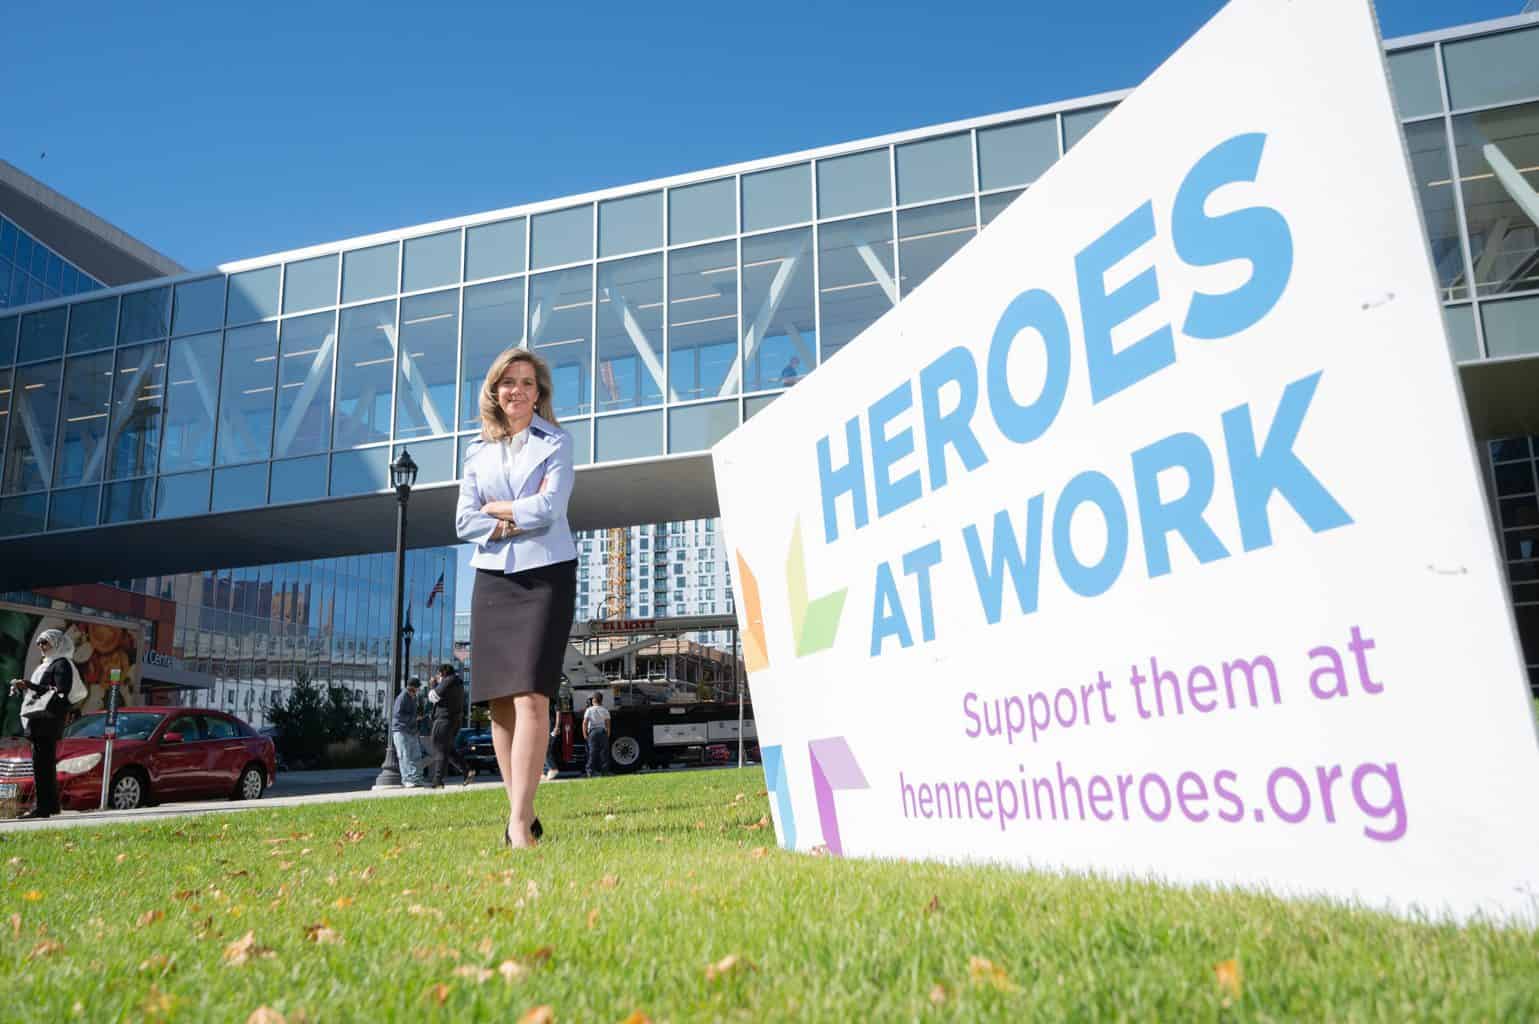 ceo jennifer decubellis standing next to heroes at work sign with skyway in background spring